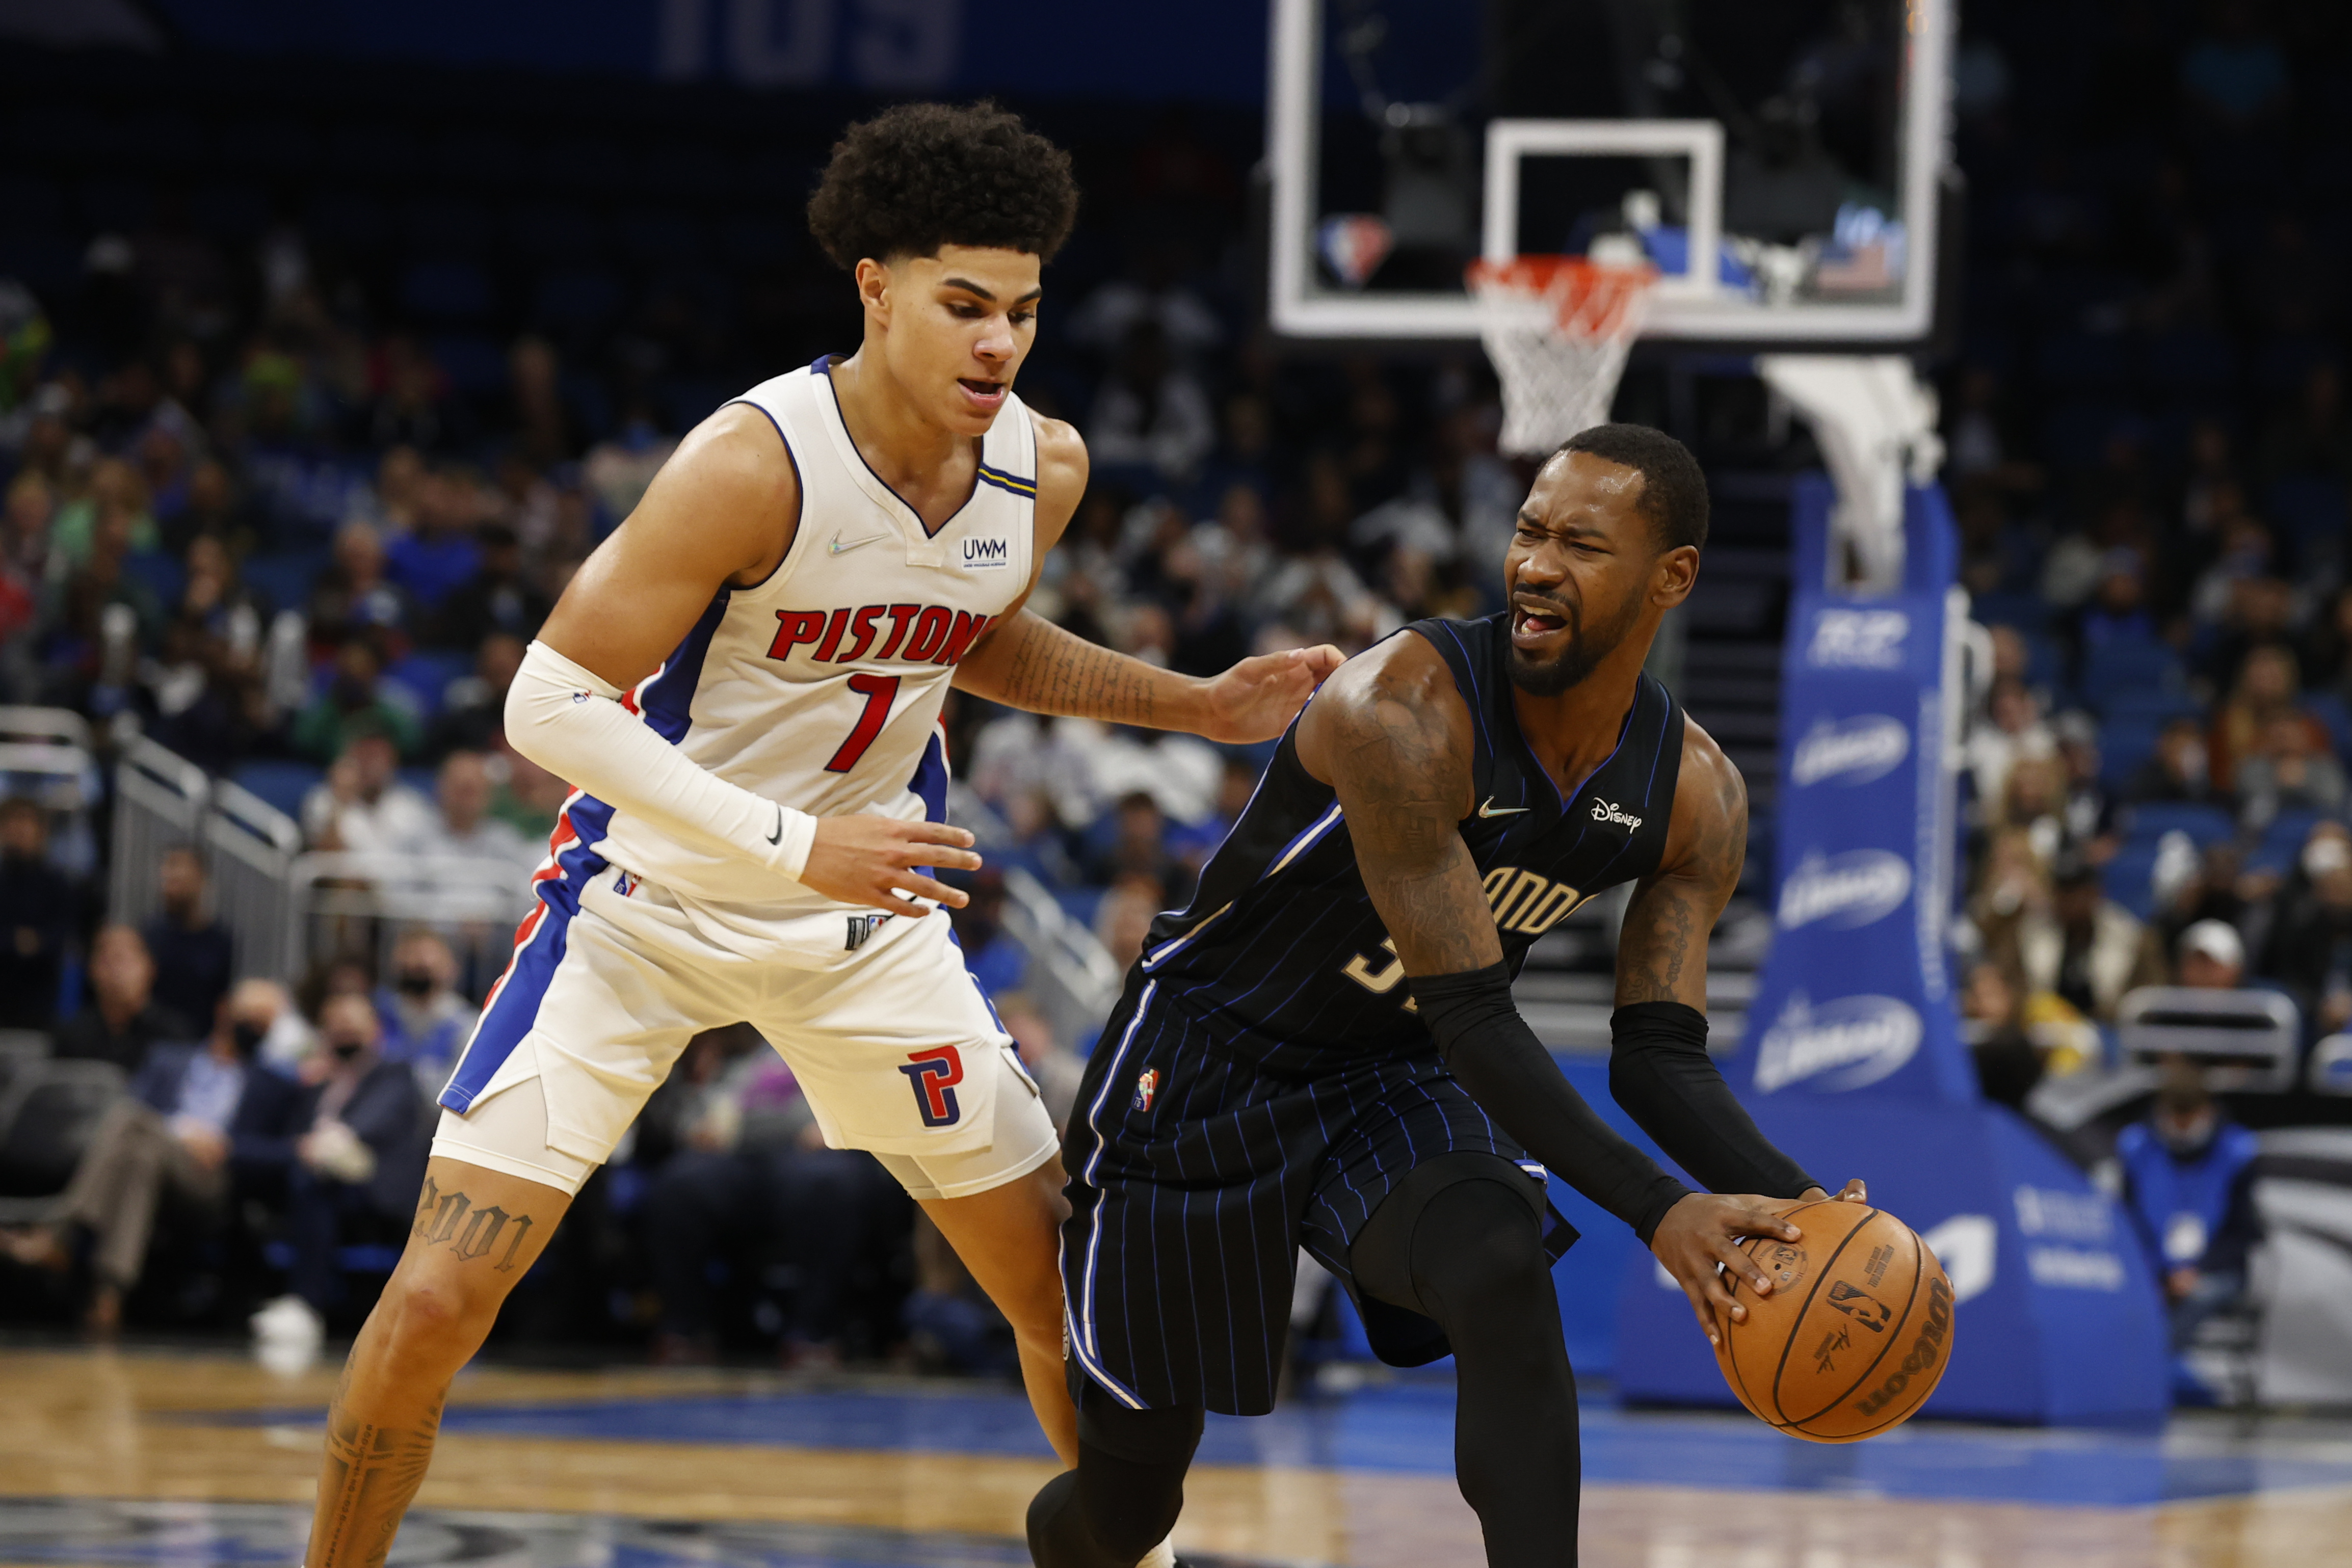 Pistons rookie Cade Cunningham to miss season opener with ankle sprain